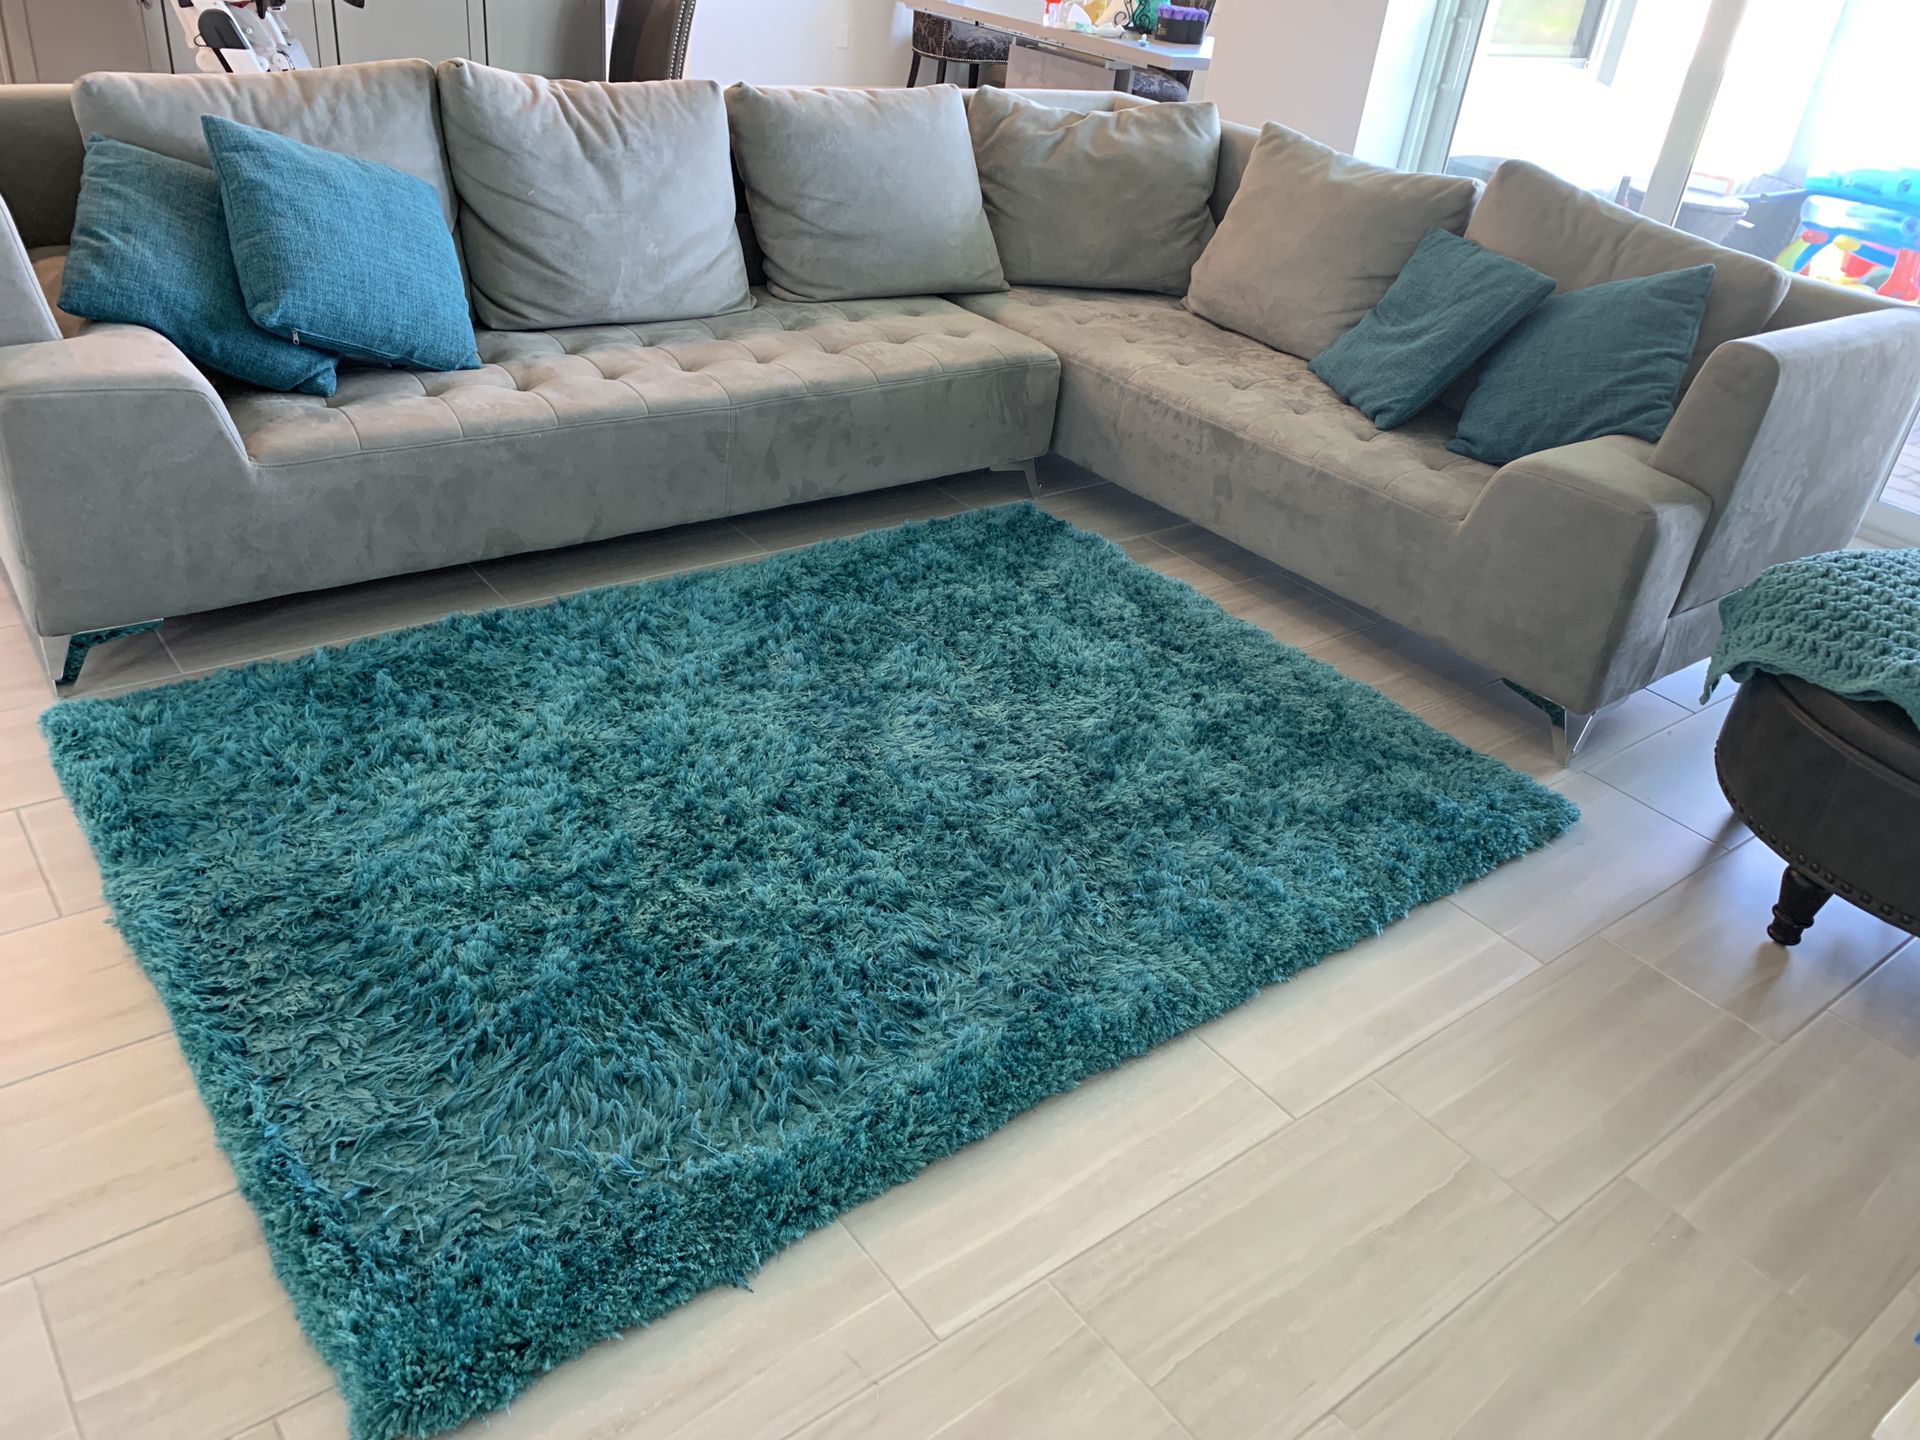 Sectional sofa with matching accessories